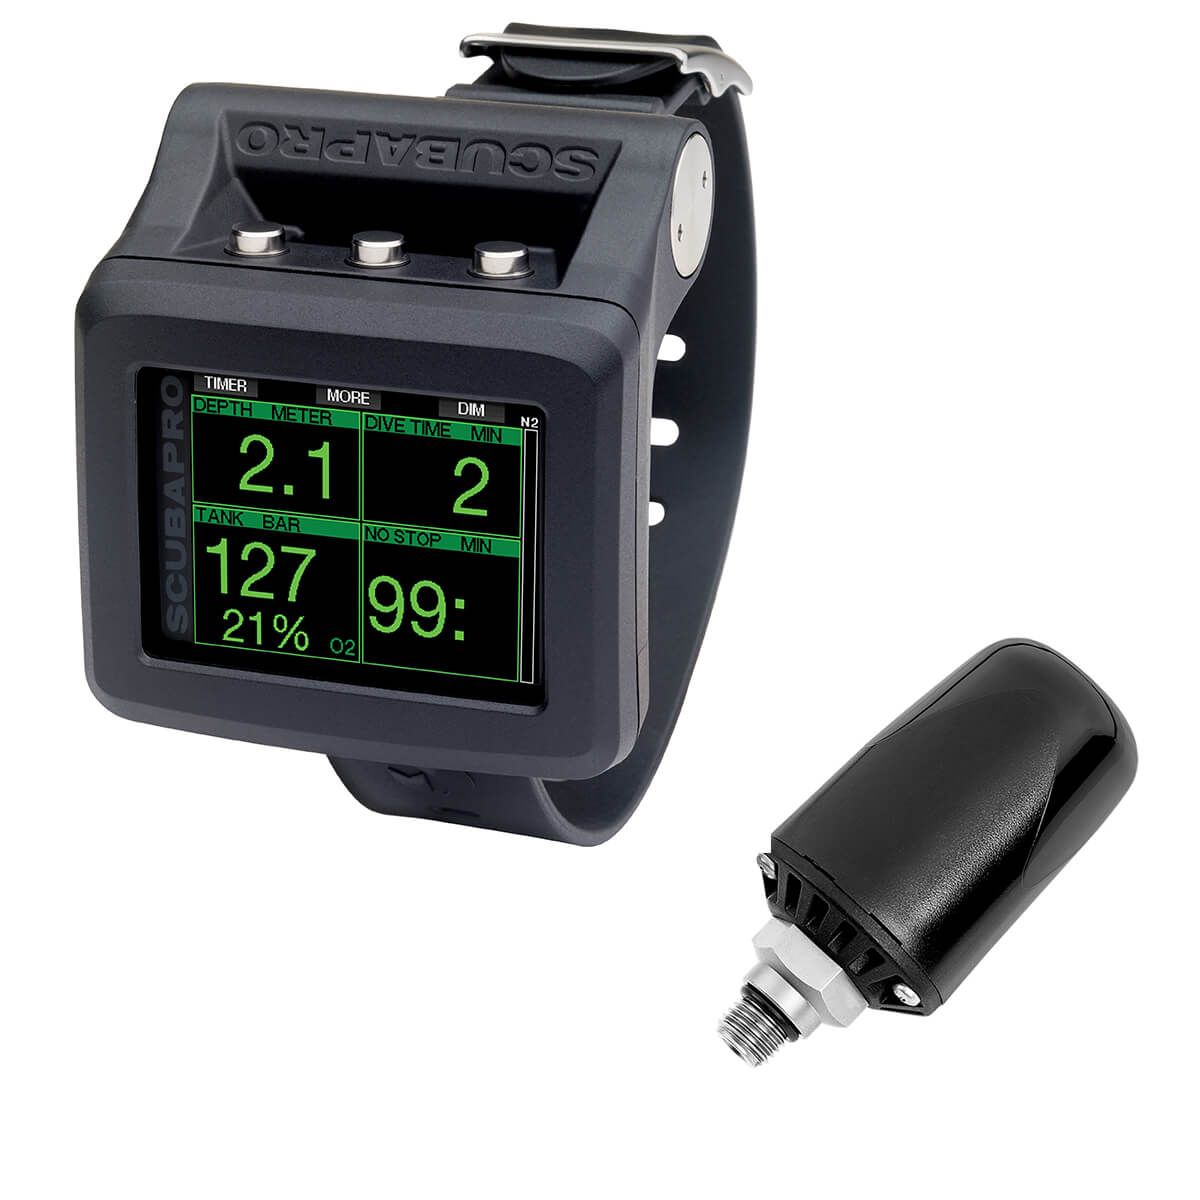 G2 Wrist Computer With transmitter and HR Monitor